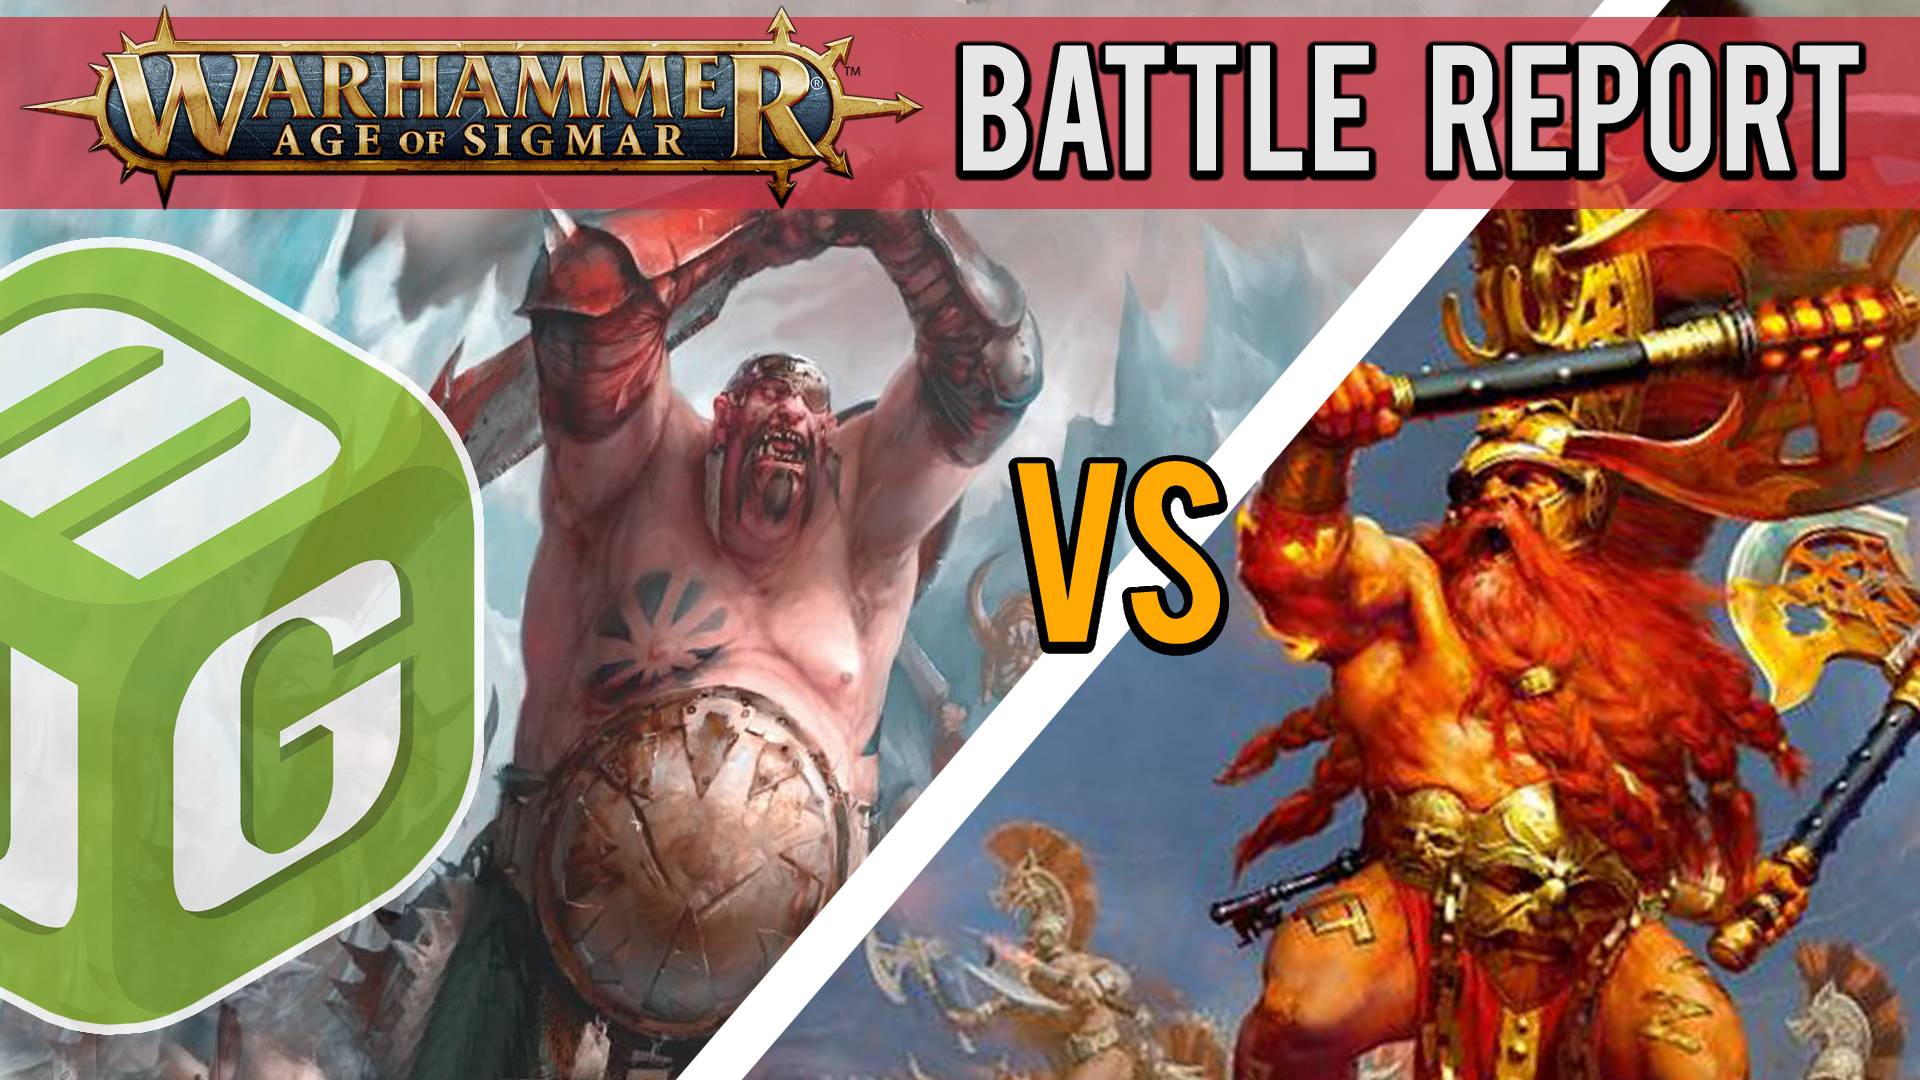 Army Lists for Ogor Mawtribes vs Fyreslayers Warhammer Age of Sigmar 3rd Edition Battle Report - The Lost City Ep 27